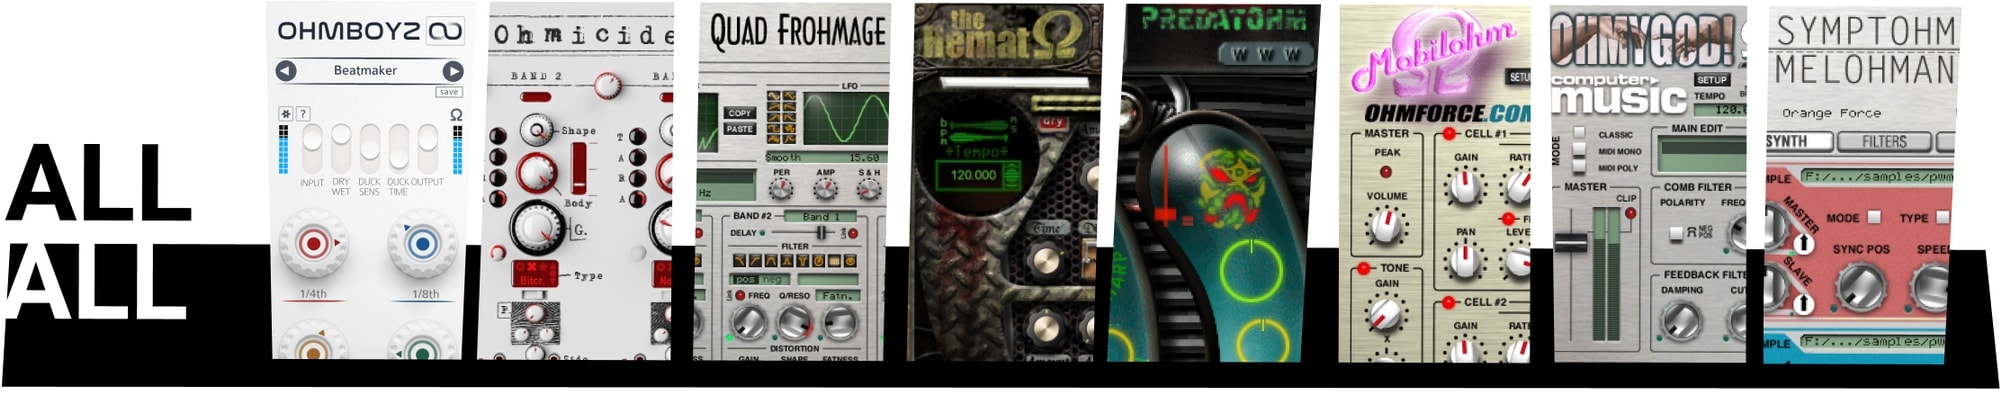 OHM Force | All All Bundle Plug-in Collection